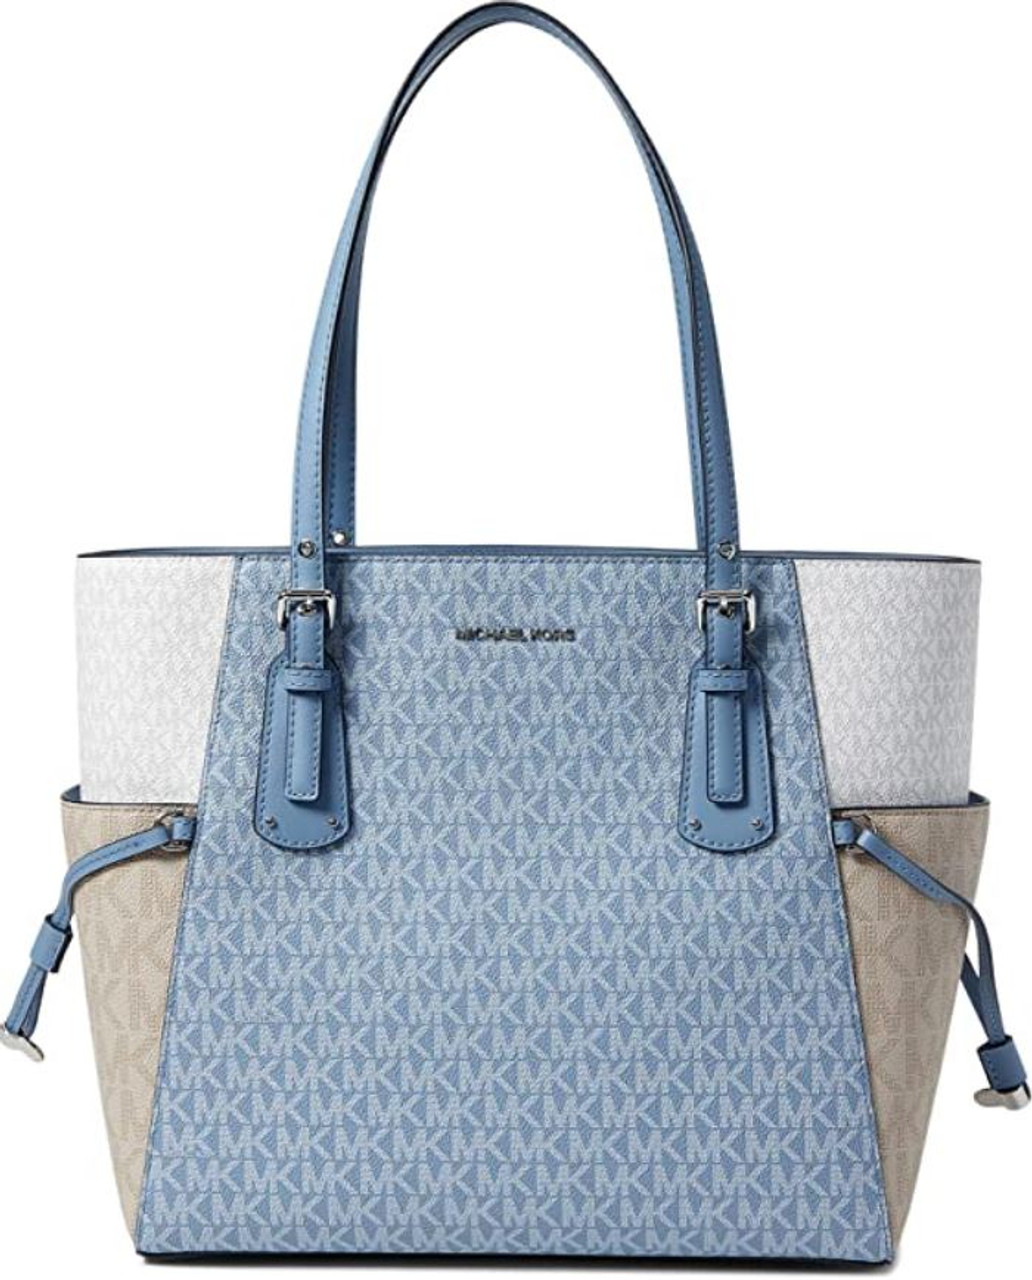 Michael Kors Voyager East/West Tote Chambray Multi One Size 30S0SV6T4V-519  - AllGlitters